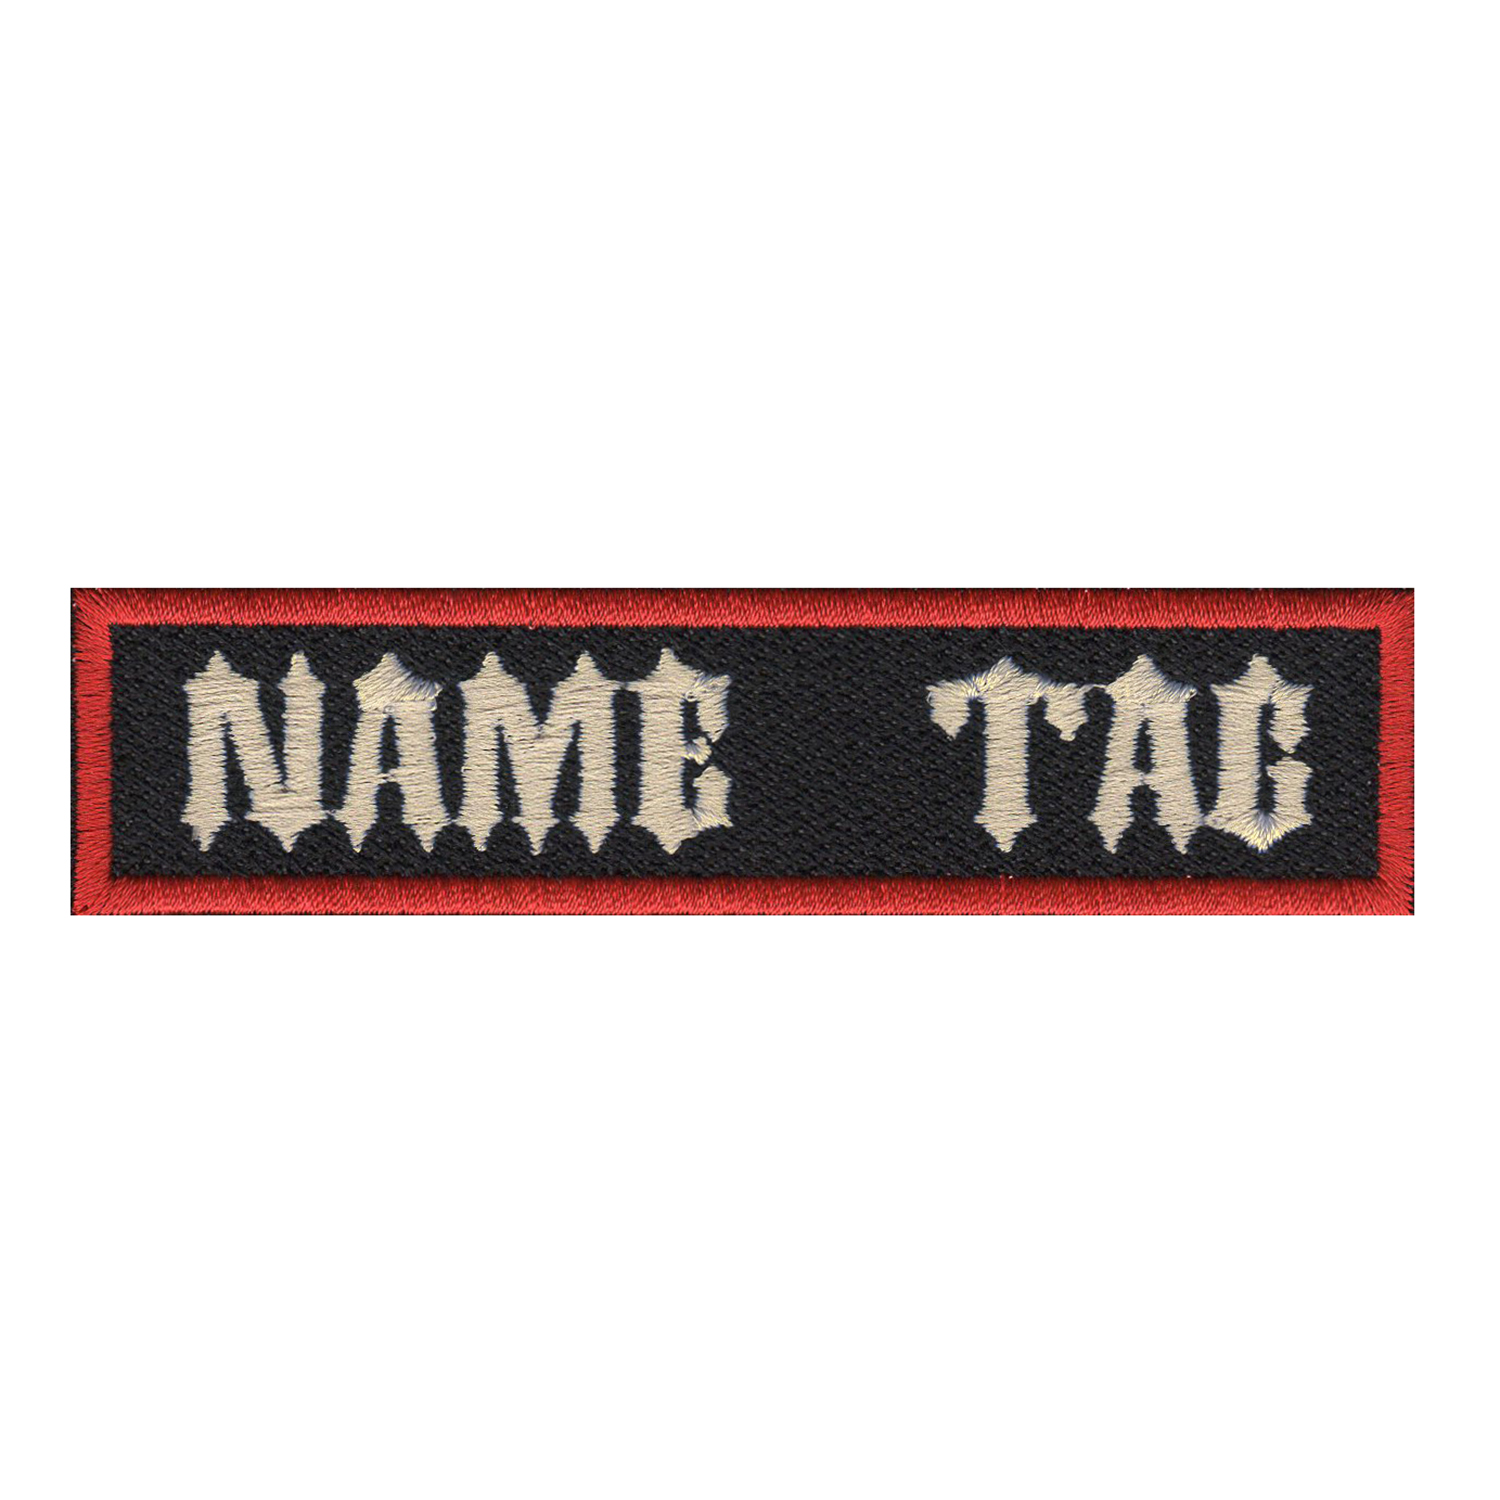 Custom Embroidered 6" x  4" Name Tag Sew Iron-On Patch Tactical Morale Biker #3 